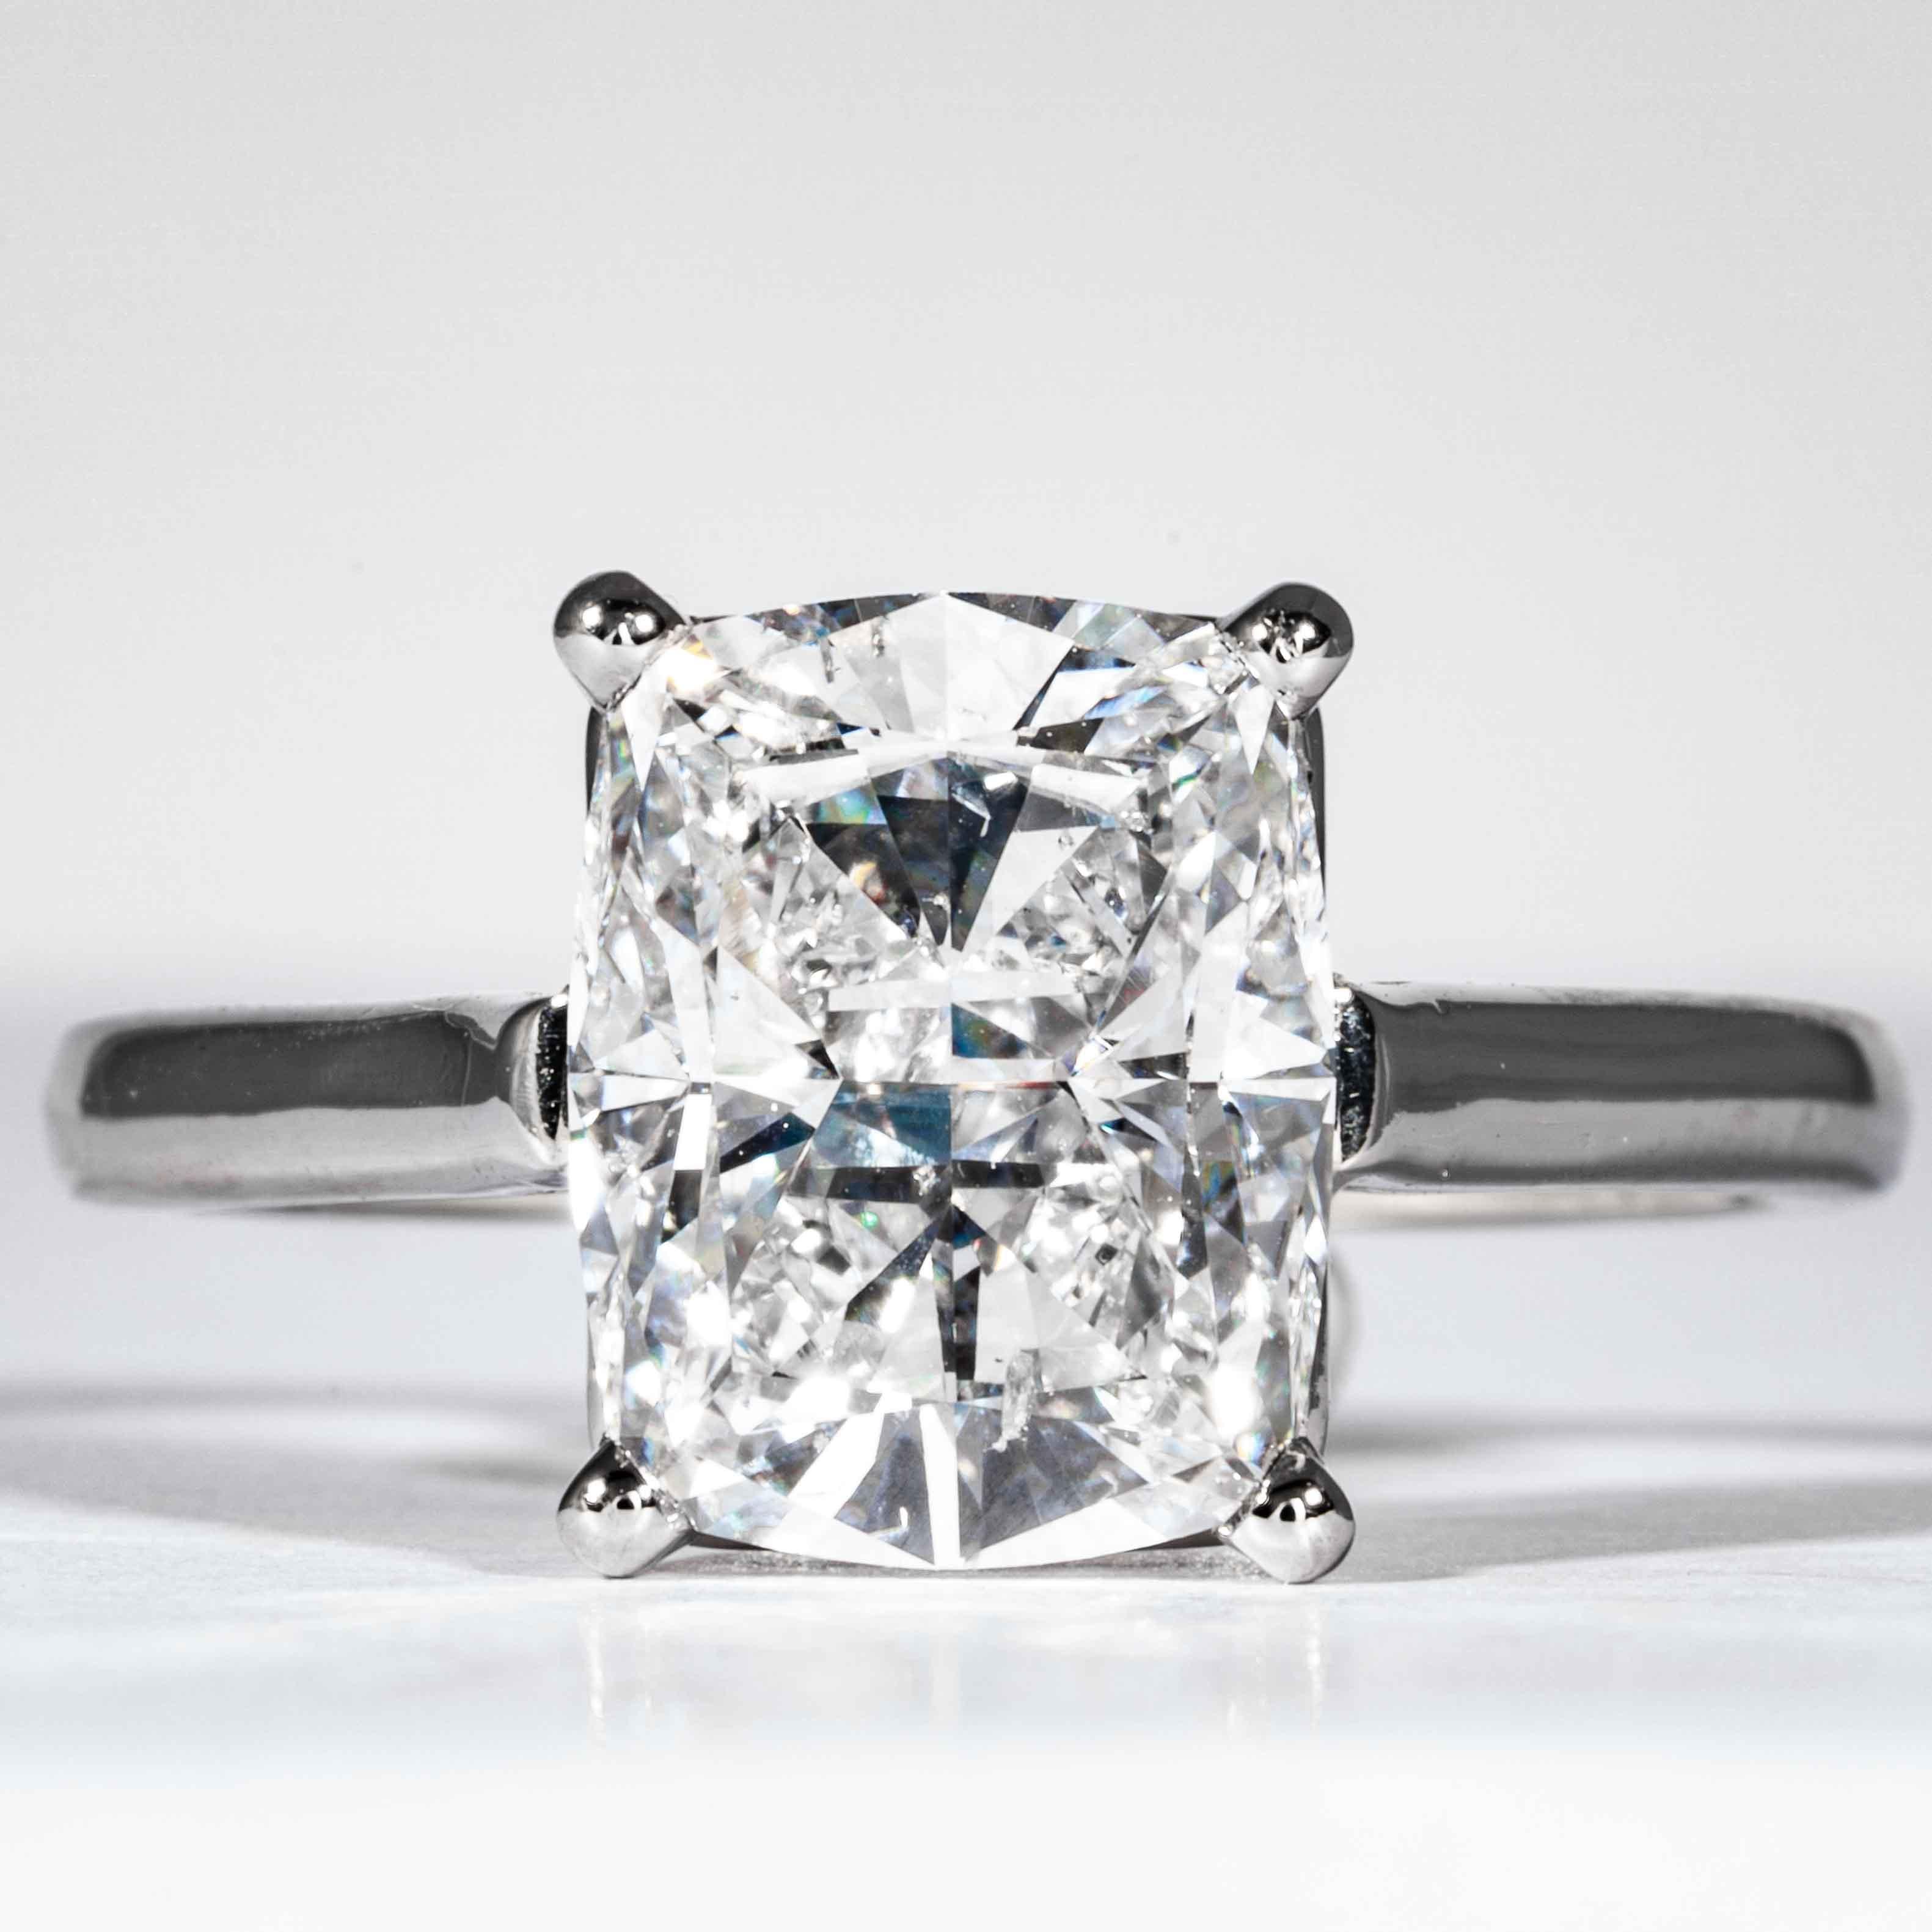 This diamond ring is offered by Shreve, Crump & Low. This 3.05 carat GIA Certified D SI1 cushion cut diamond measuring 10.07 x 7.92 x 5.20 mm is custom set in a handcrafted platinum solitaire ring, signed Tiffany & Co. The 3.05 carat cushion cut is